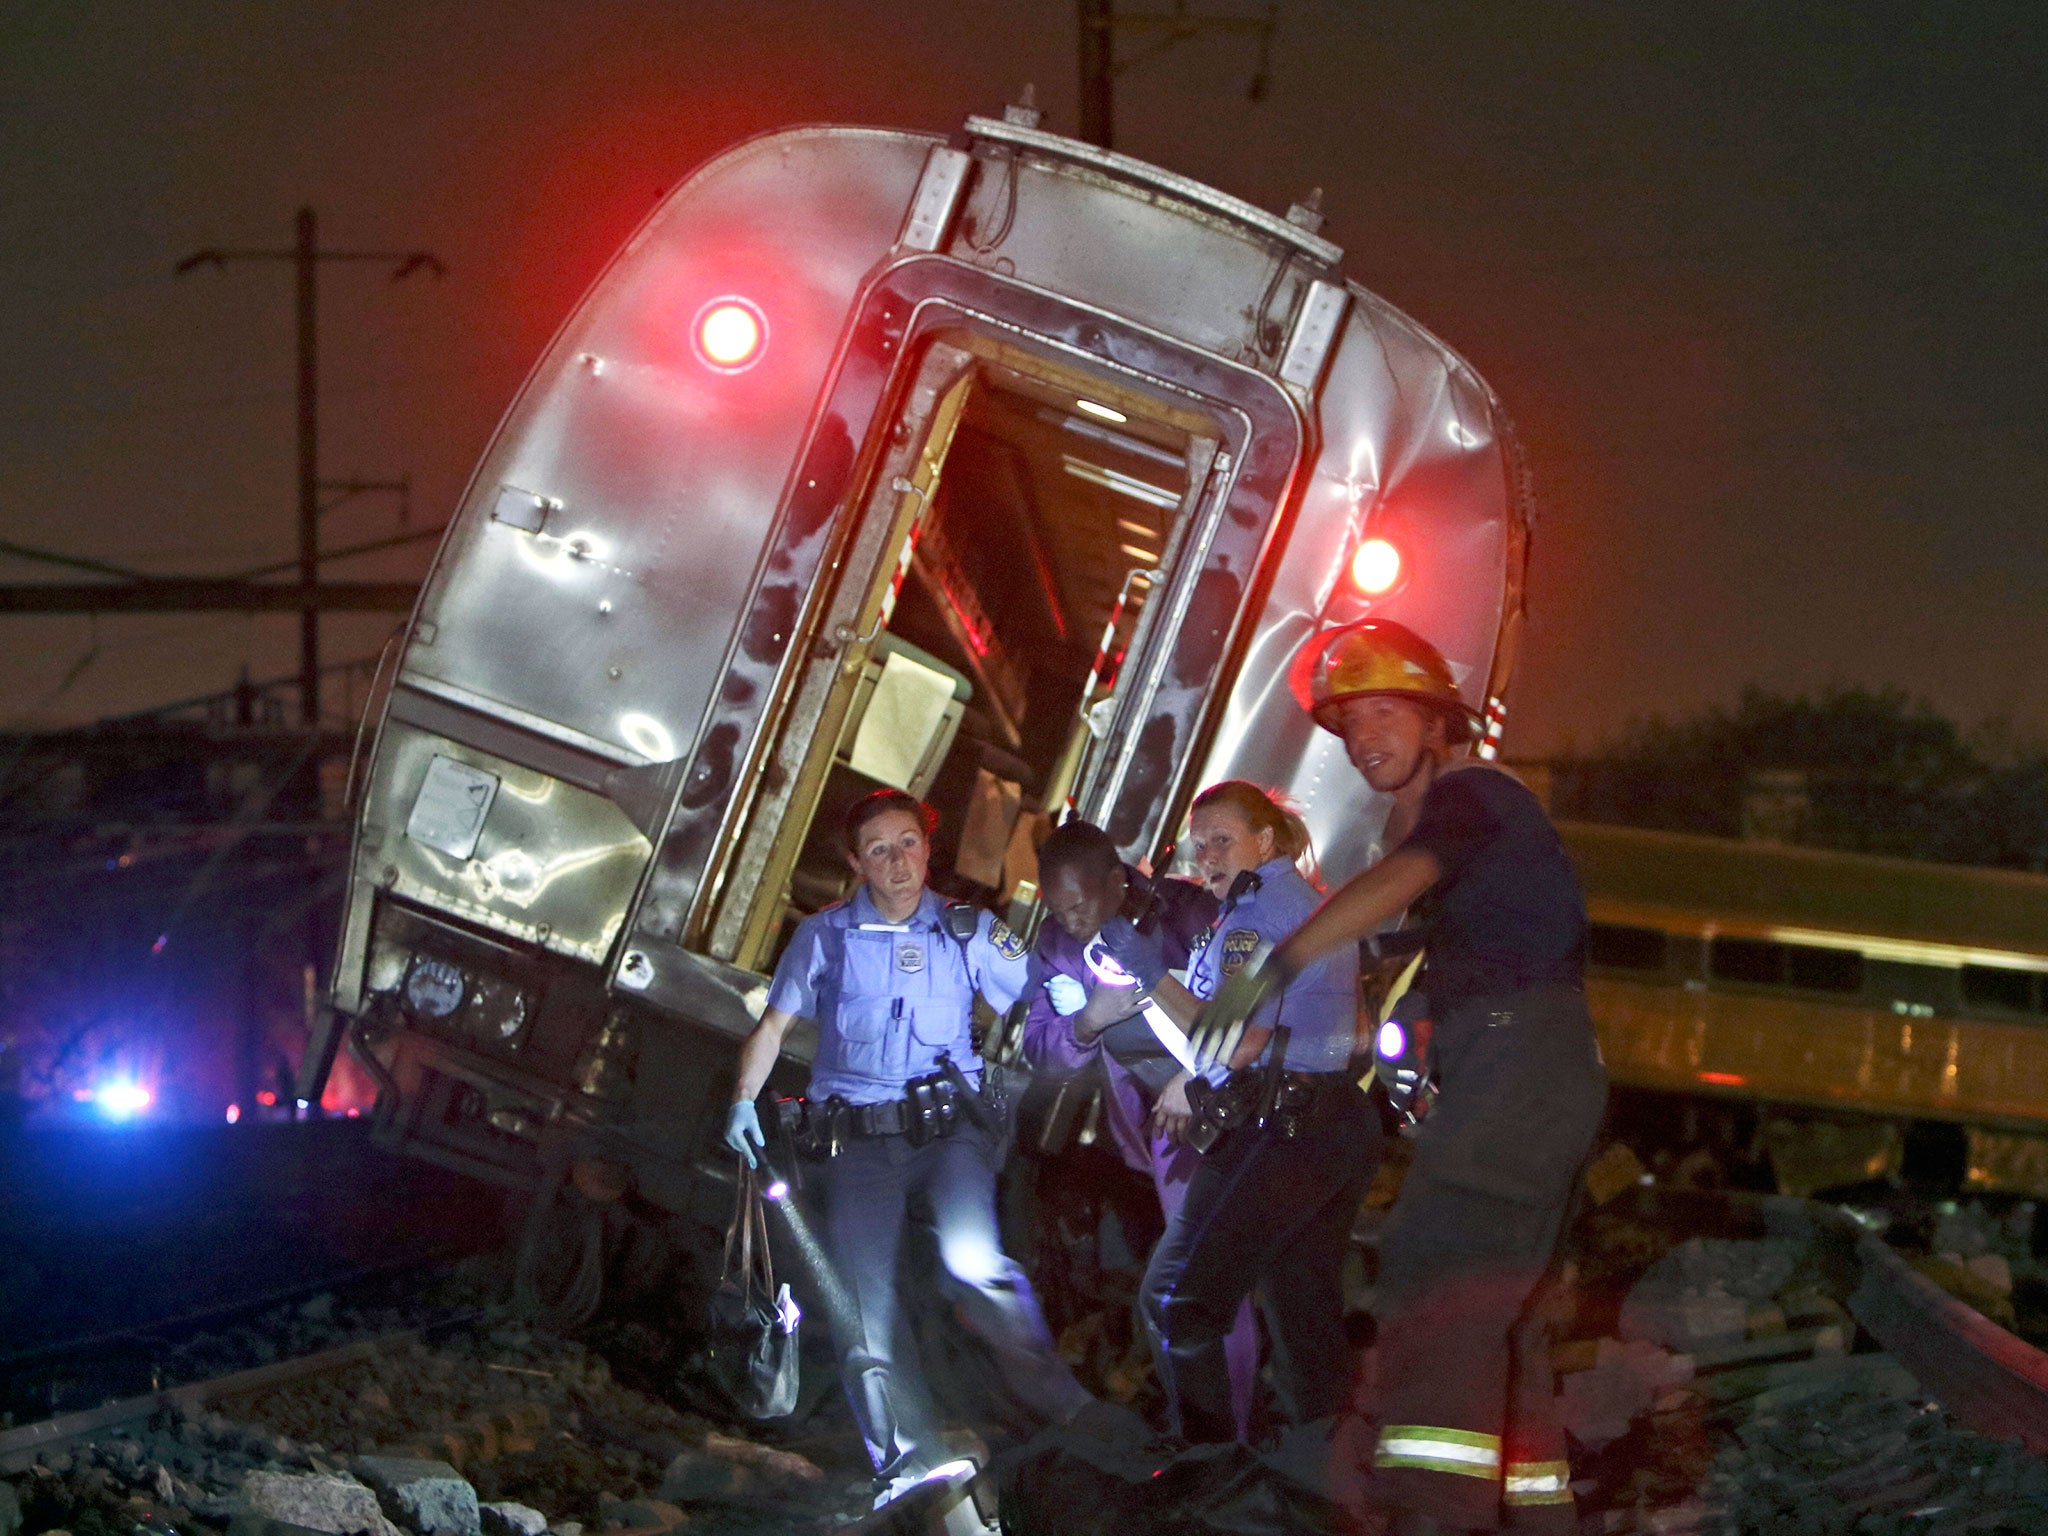 Emergency personnel work the scene of a deadly train wreck